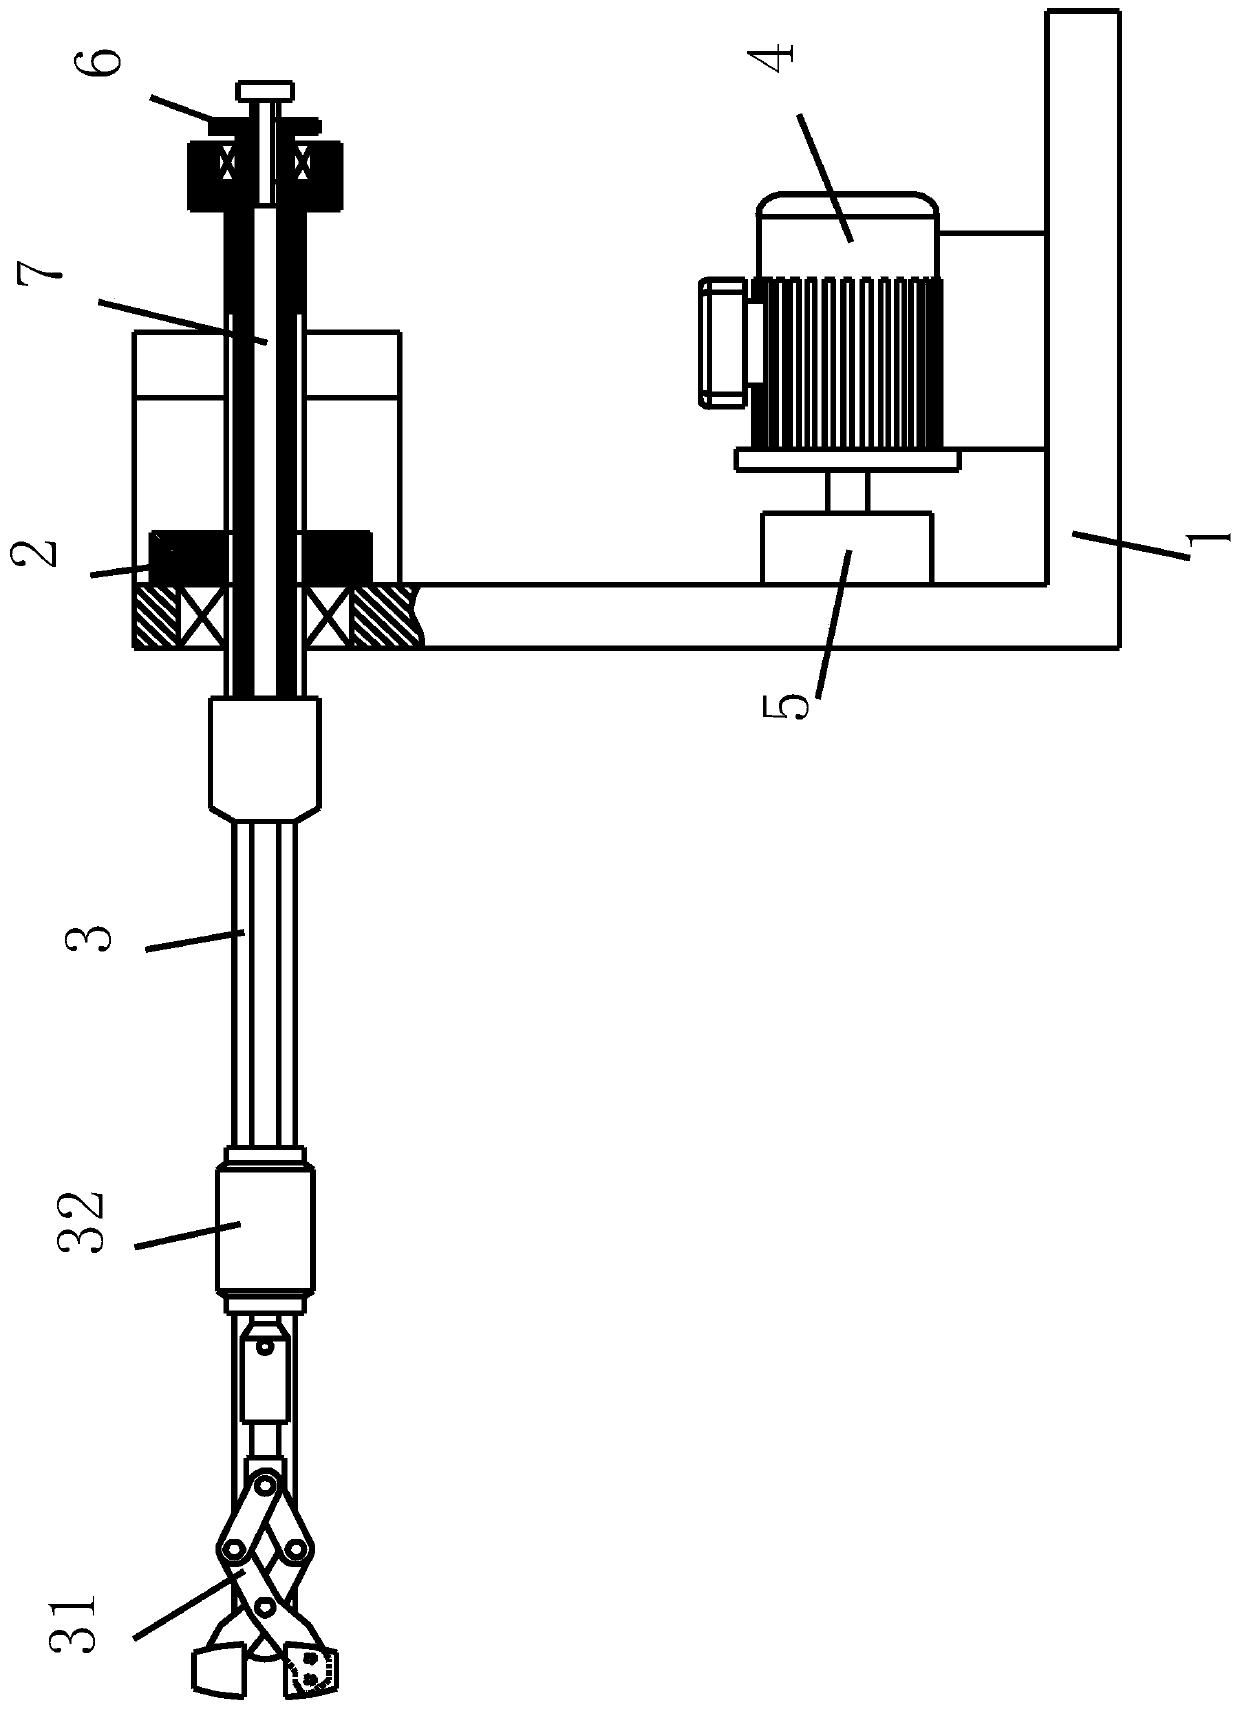 A component for automatic cleaning of thread holes in rotating parts of a loading vehicle